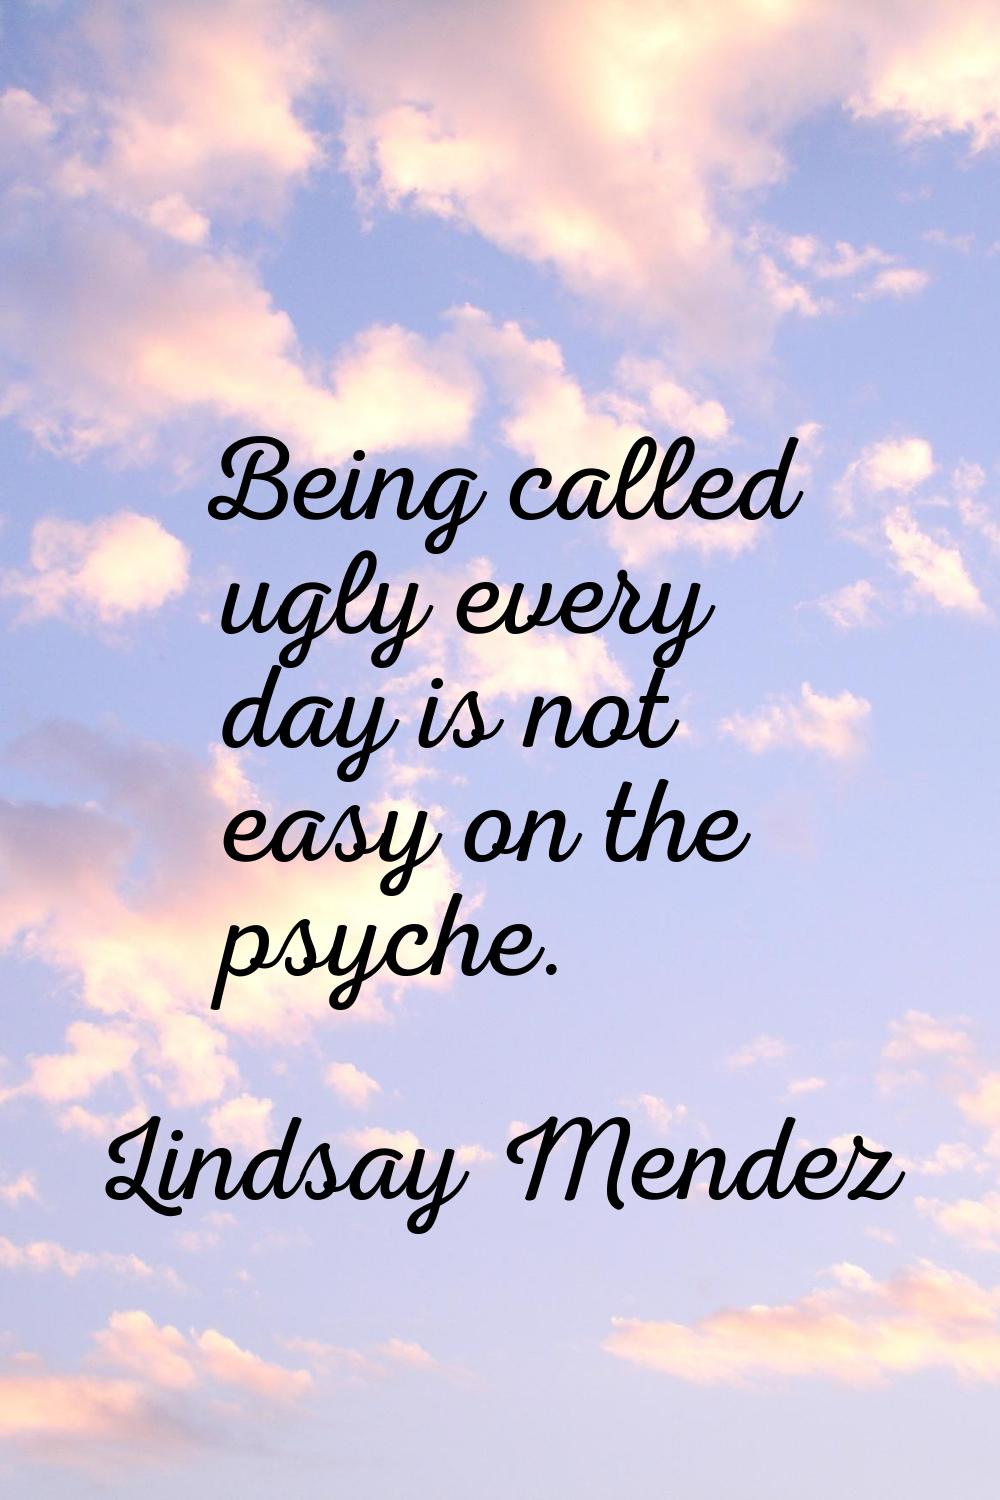 Being called ugly every day is not easy on the psyche.